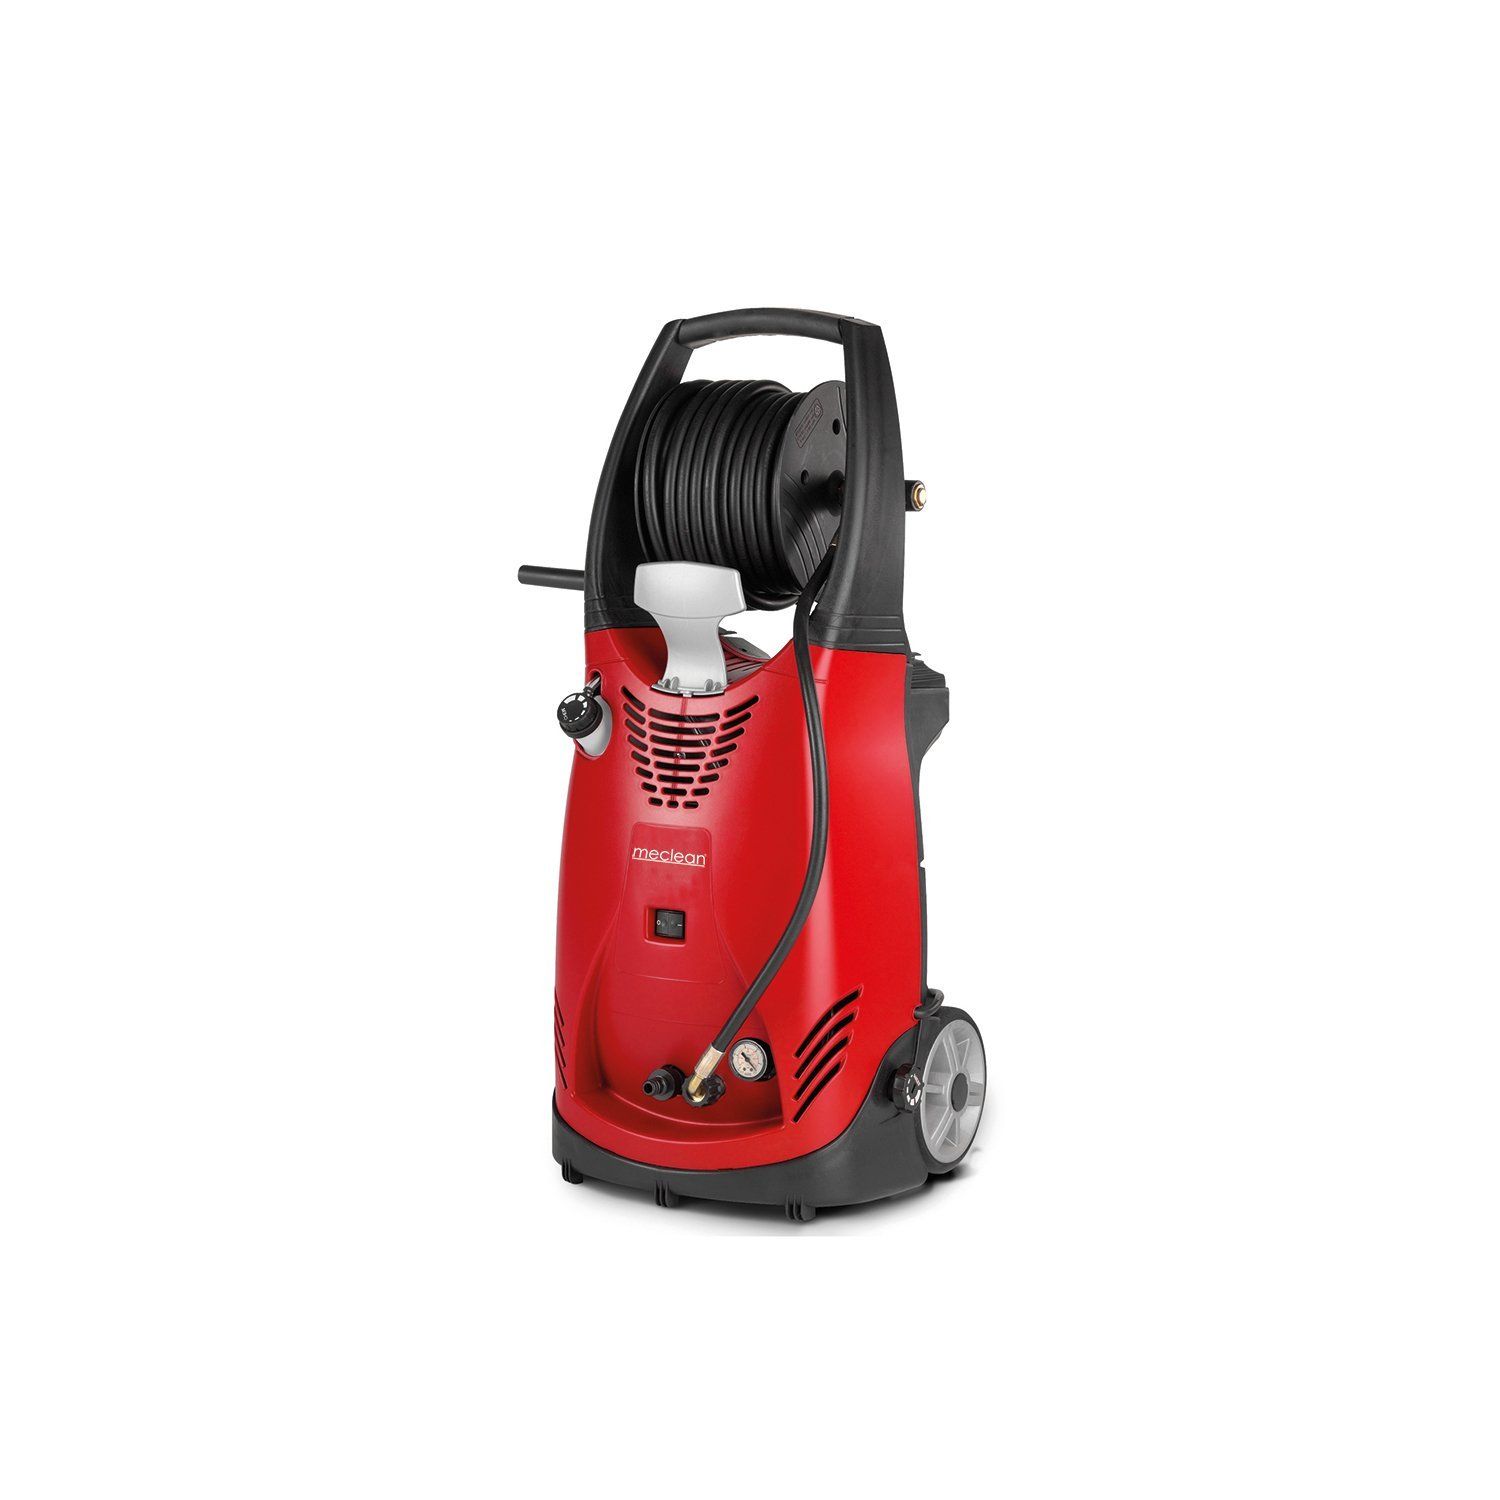 Meclean professional cold water high pressure washer AQUAJET 150/8